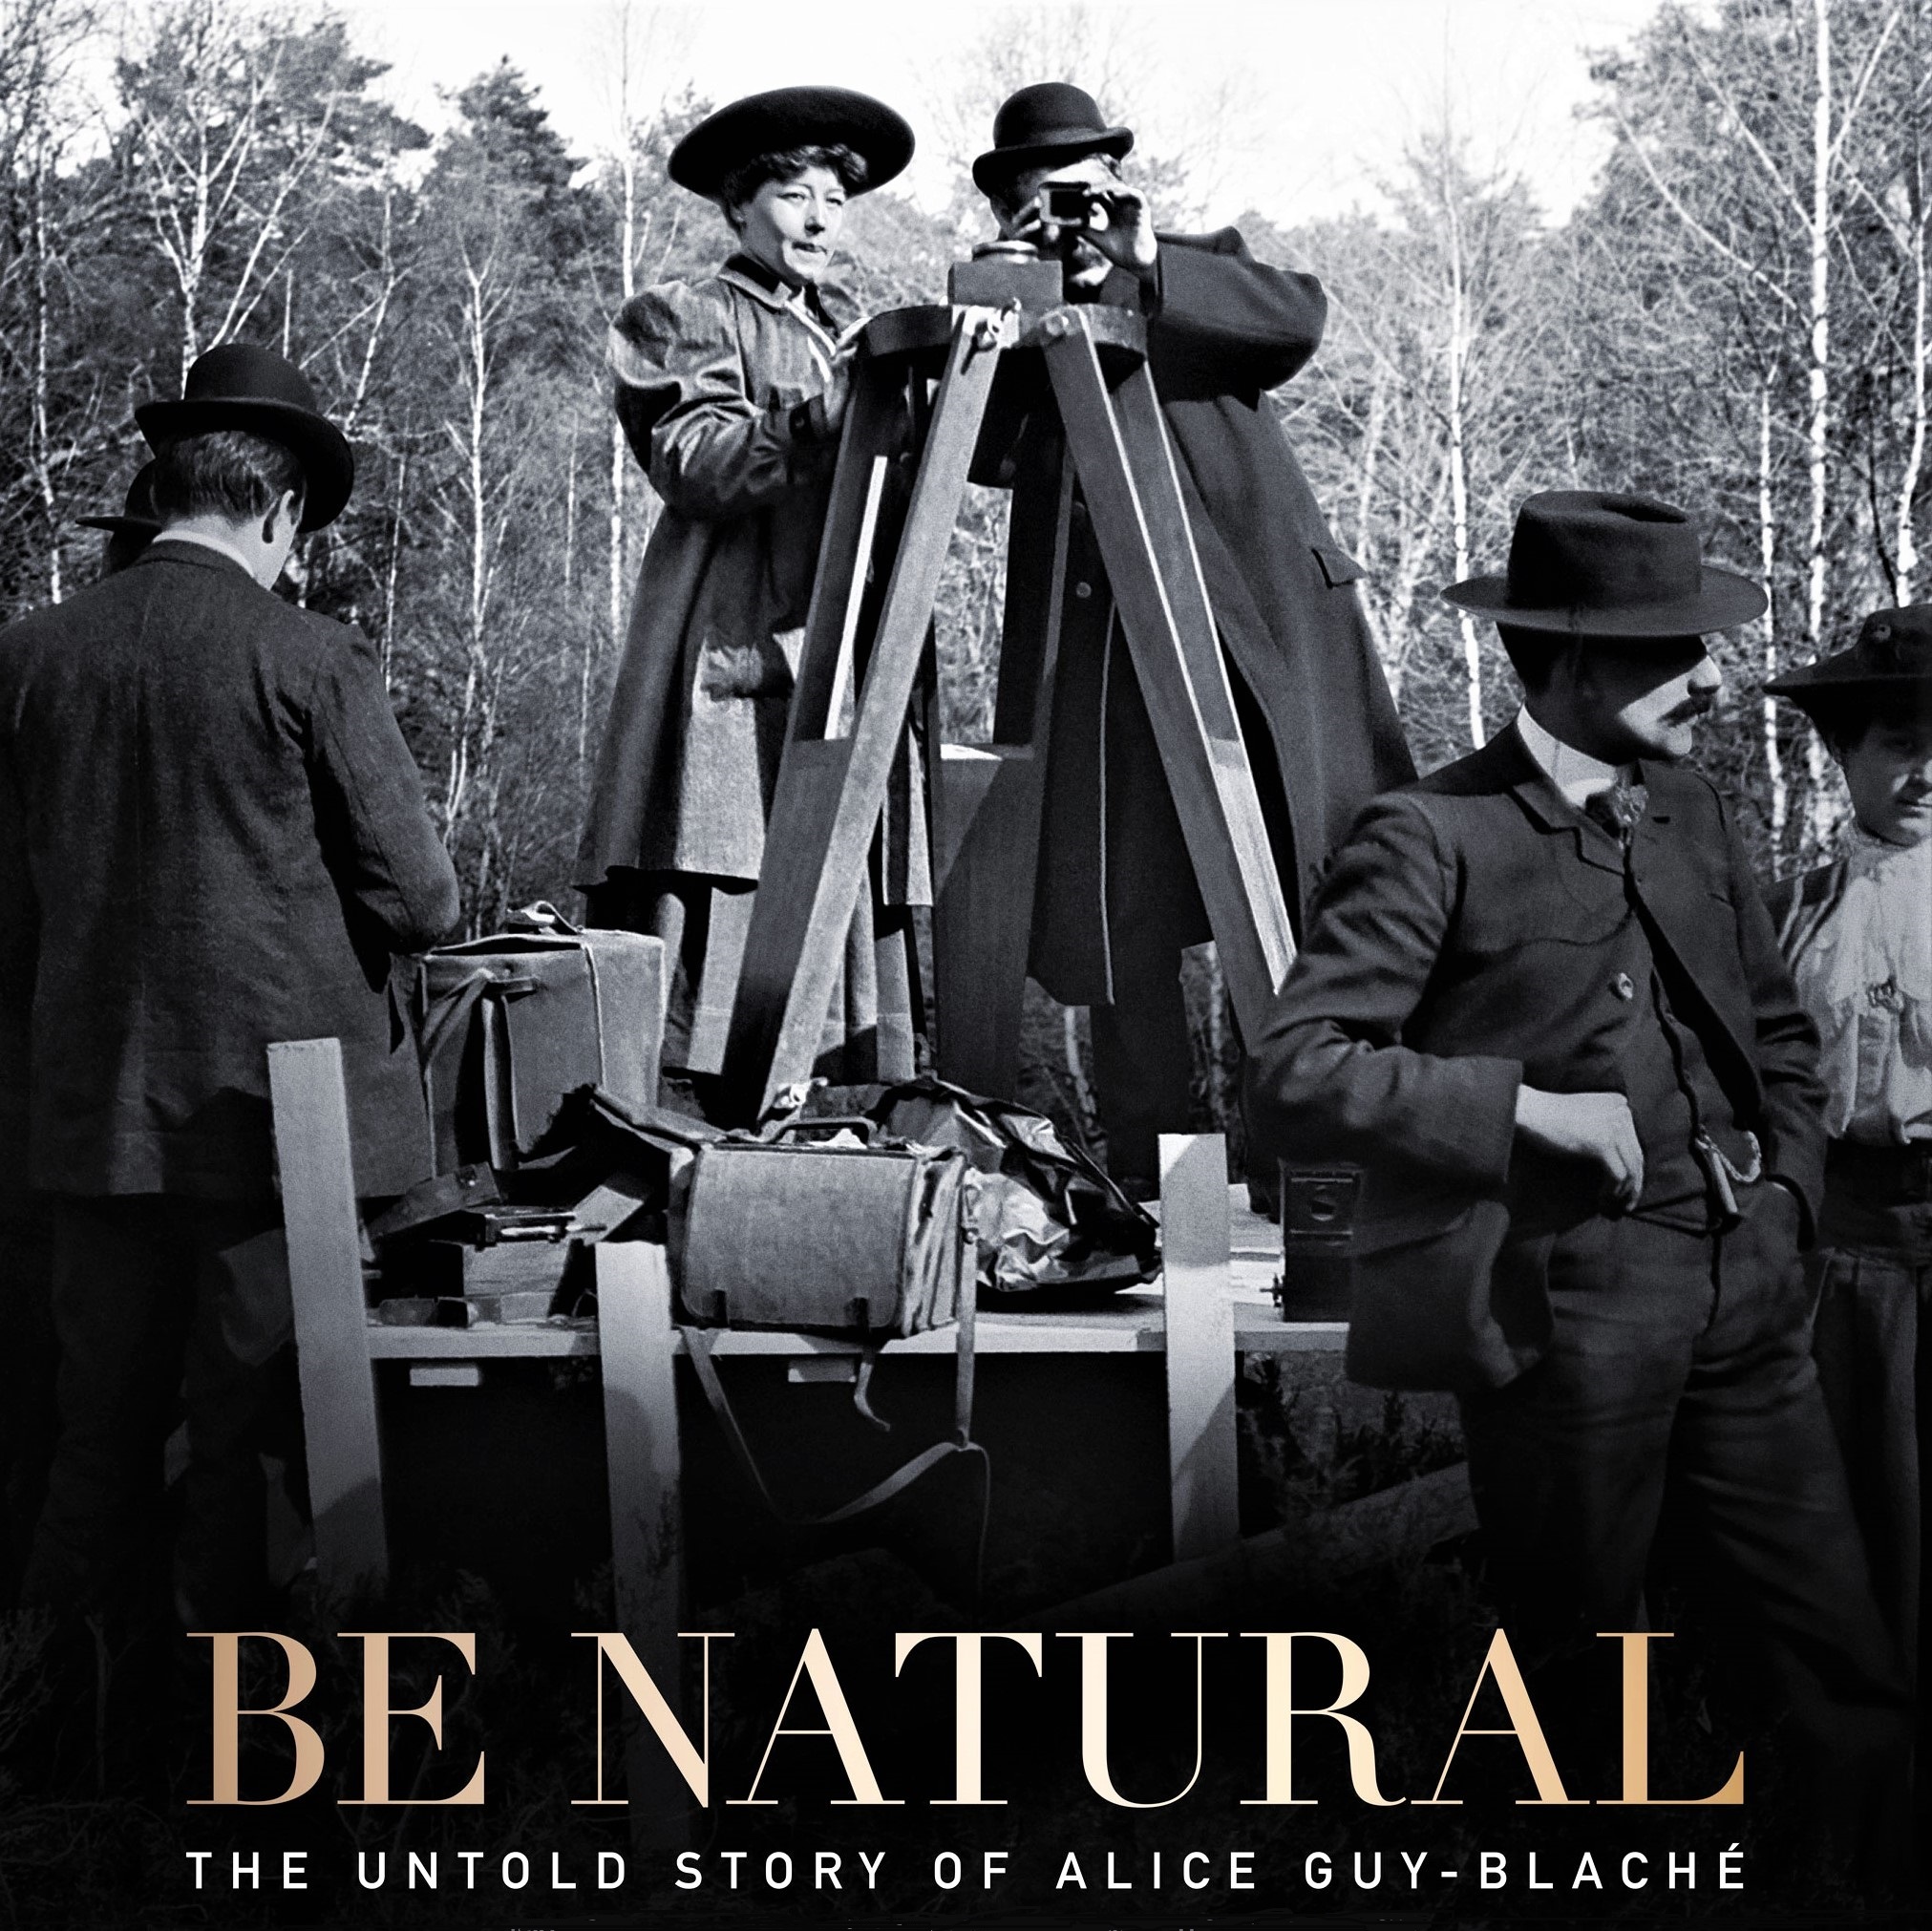 Documentary film screening and discussion at UCSB: 'Be Natural'